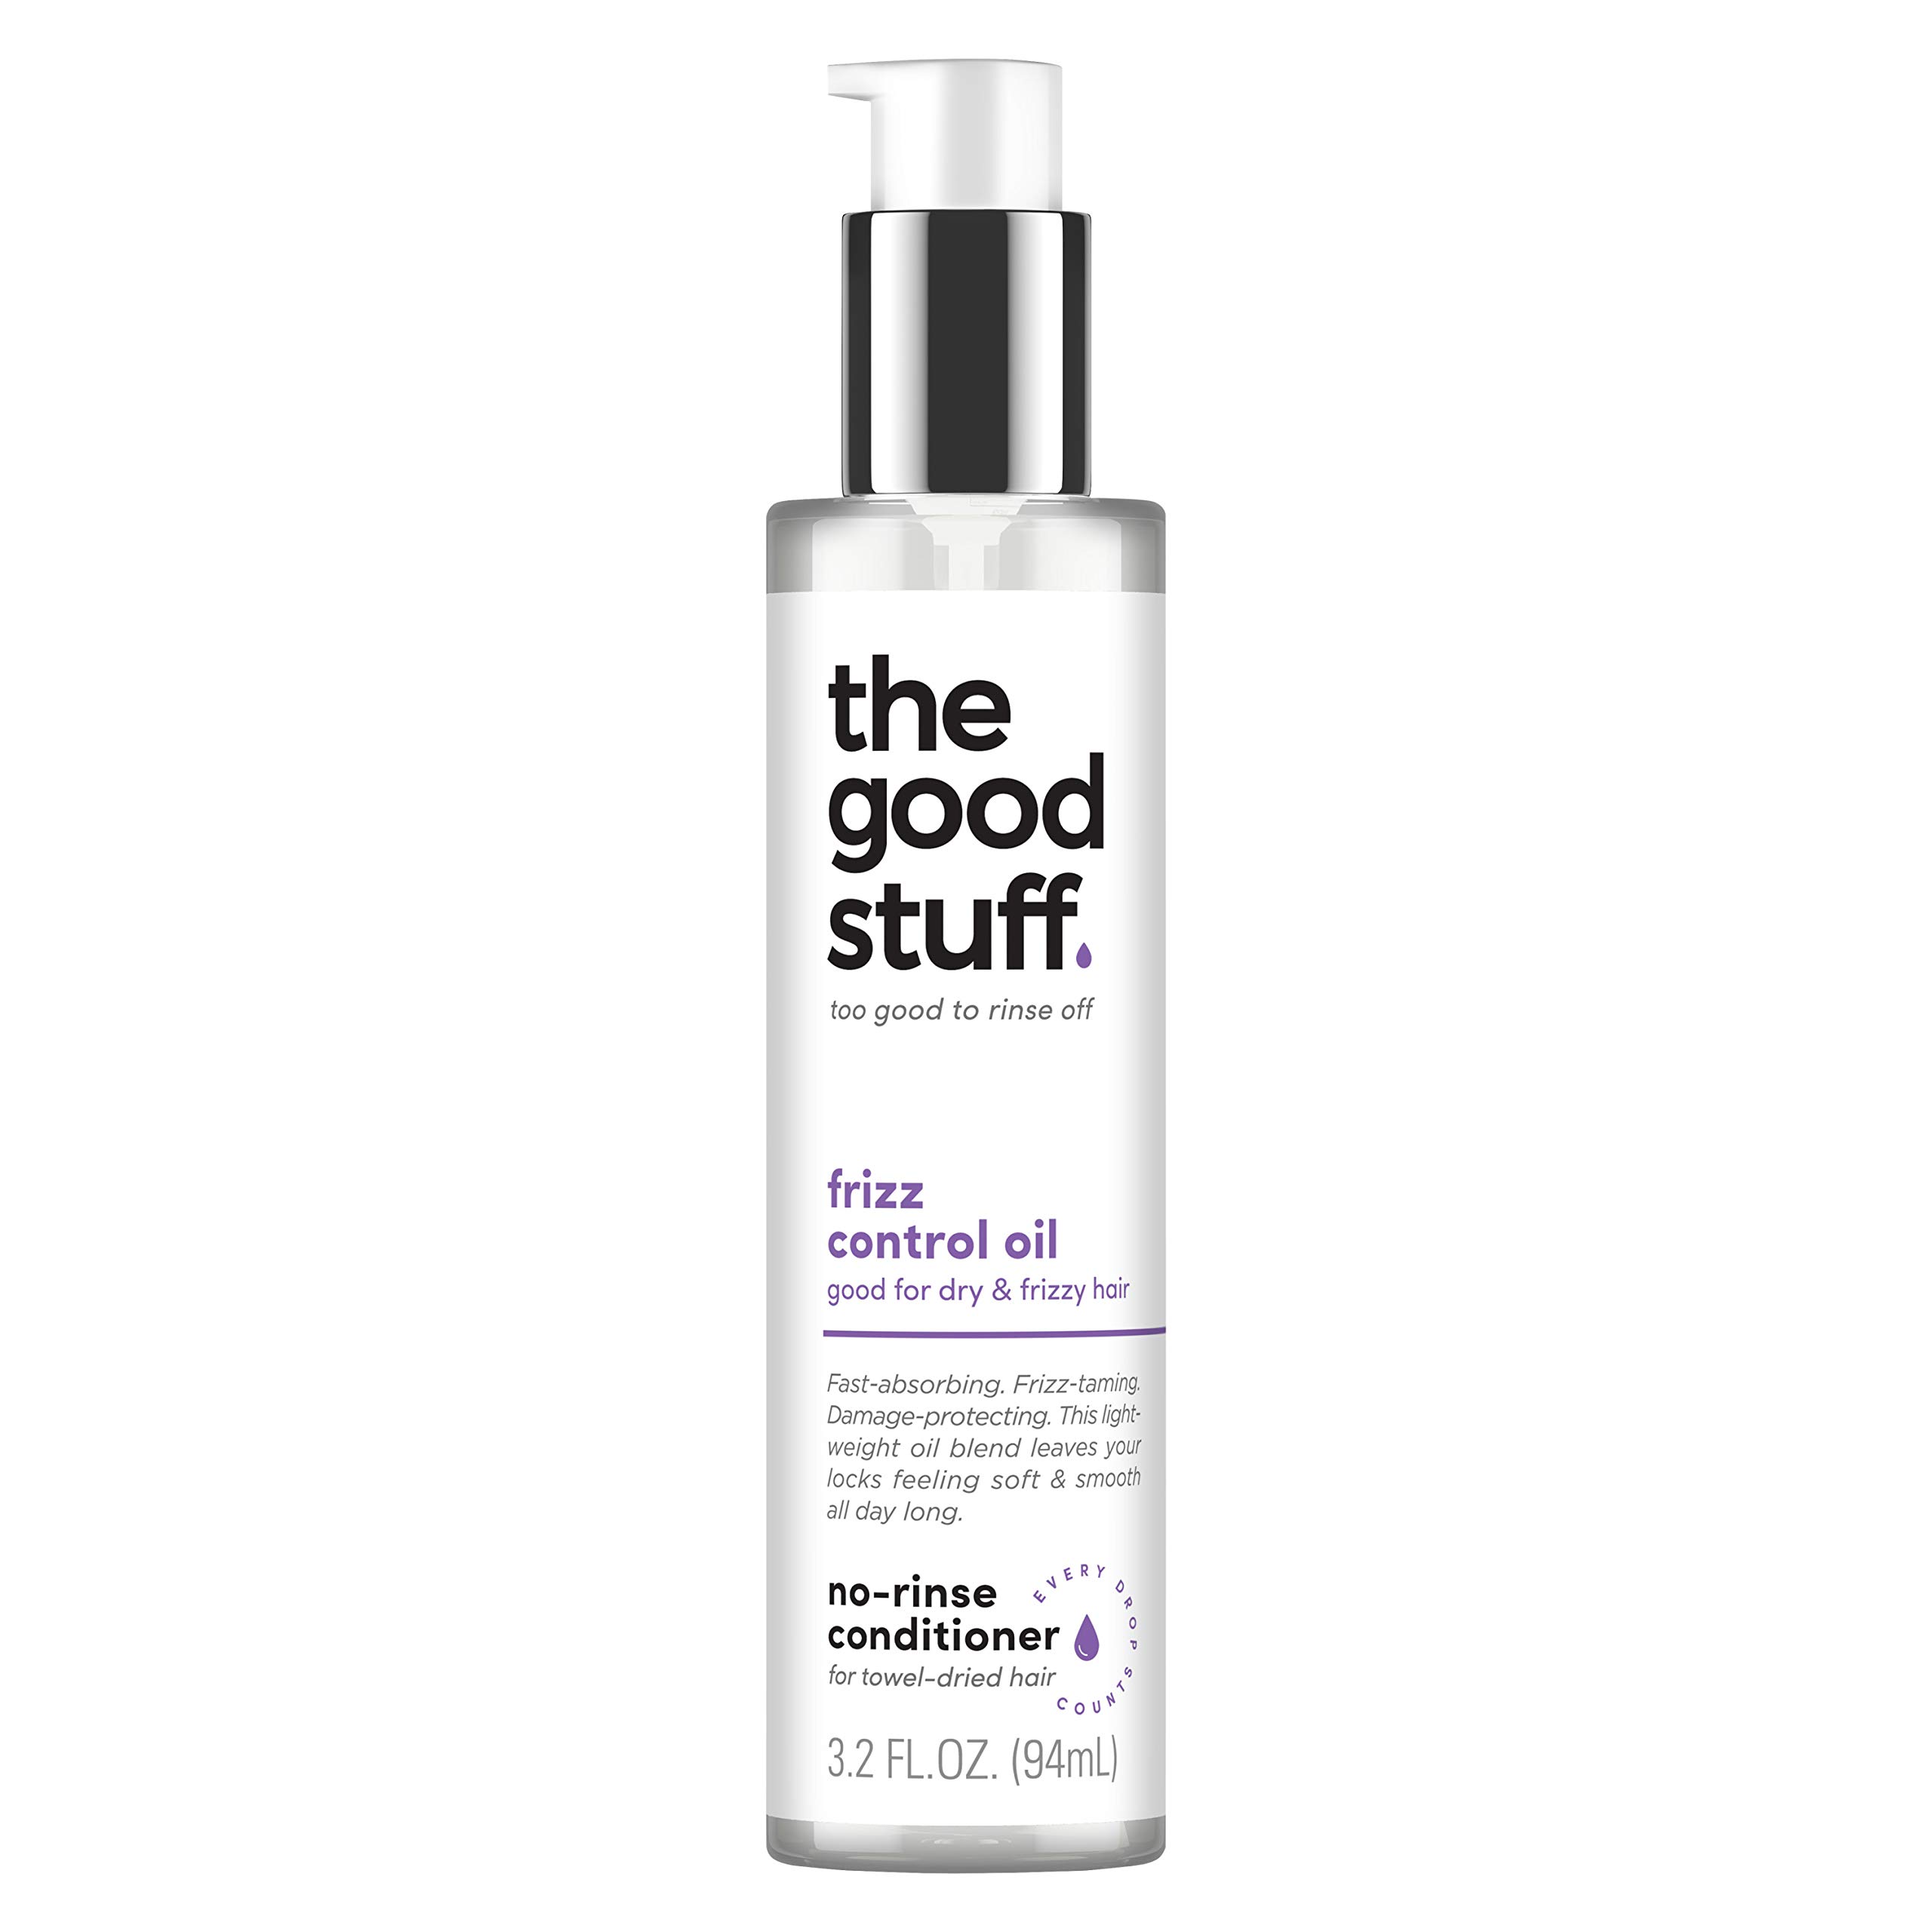 Introducing the good stuff: conditioners too good to rinse off